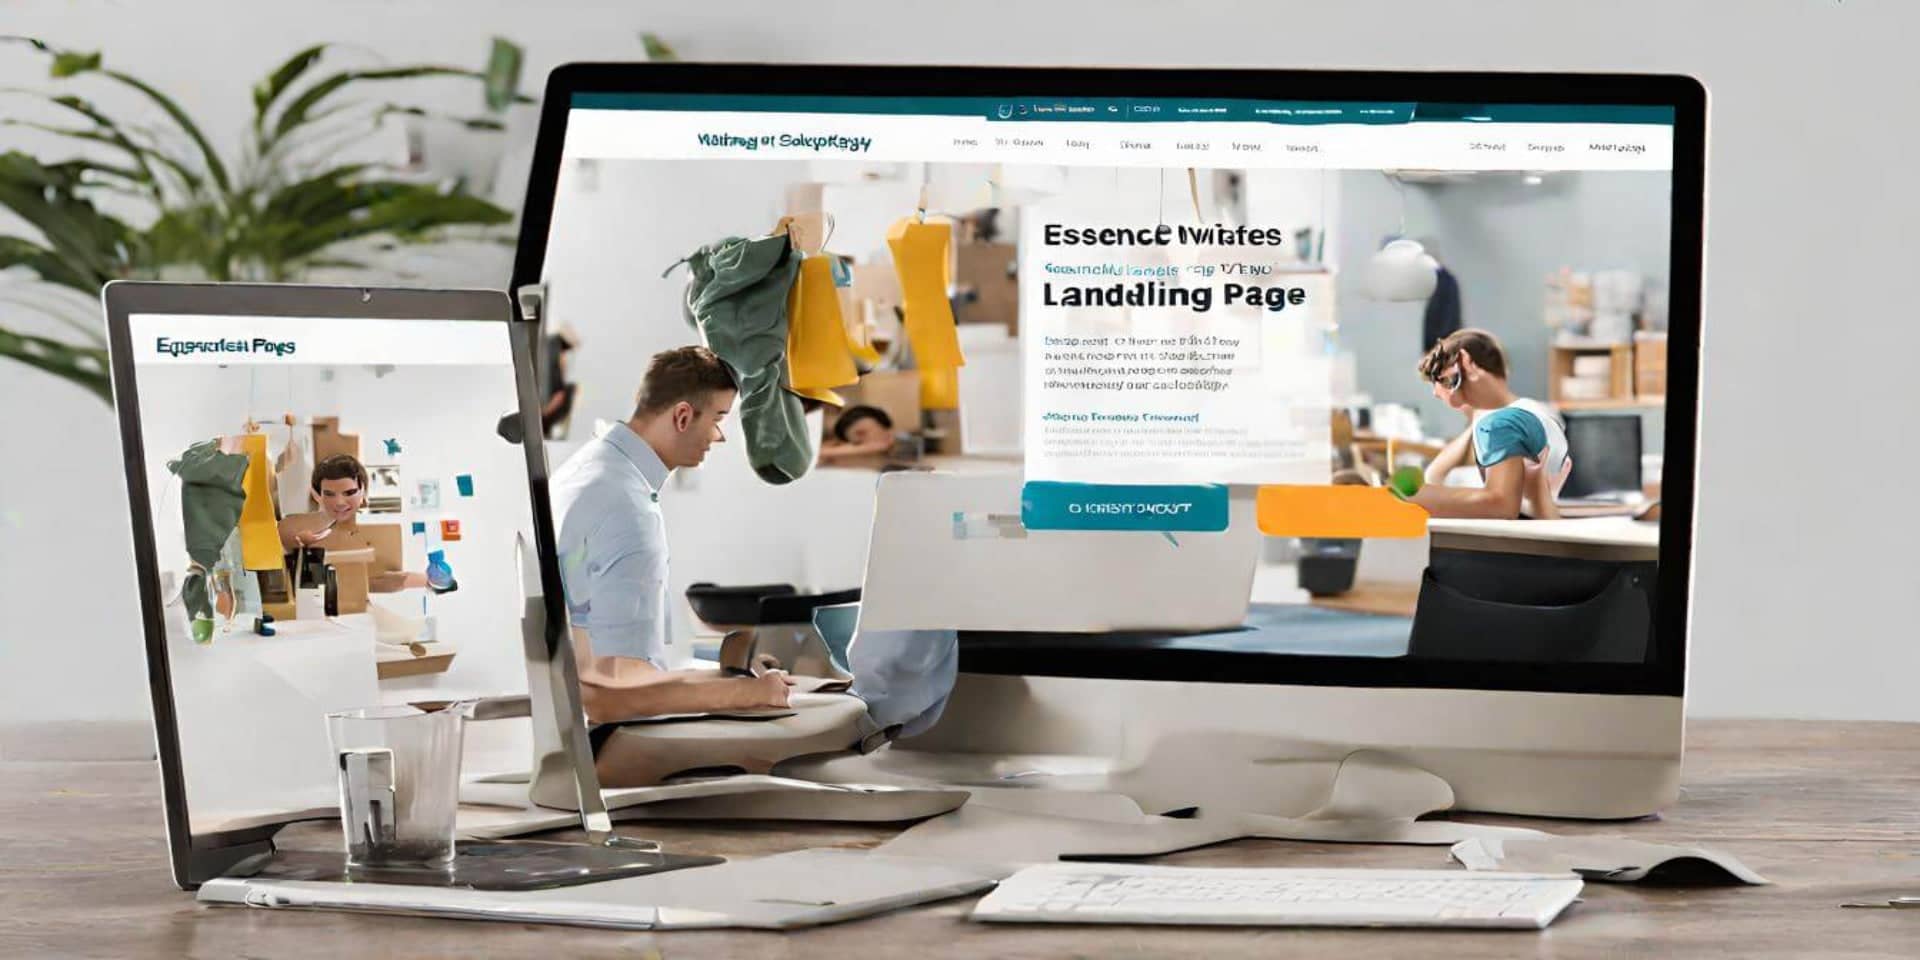 We will create Your Custom Landing Page Copy